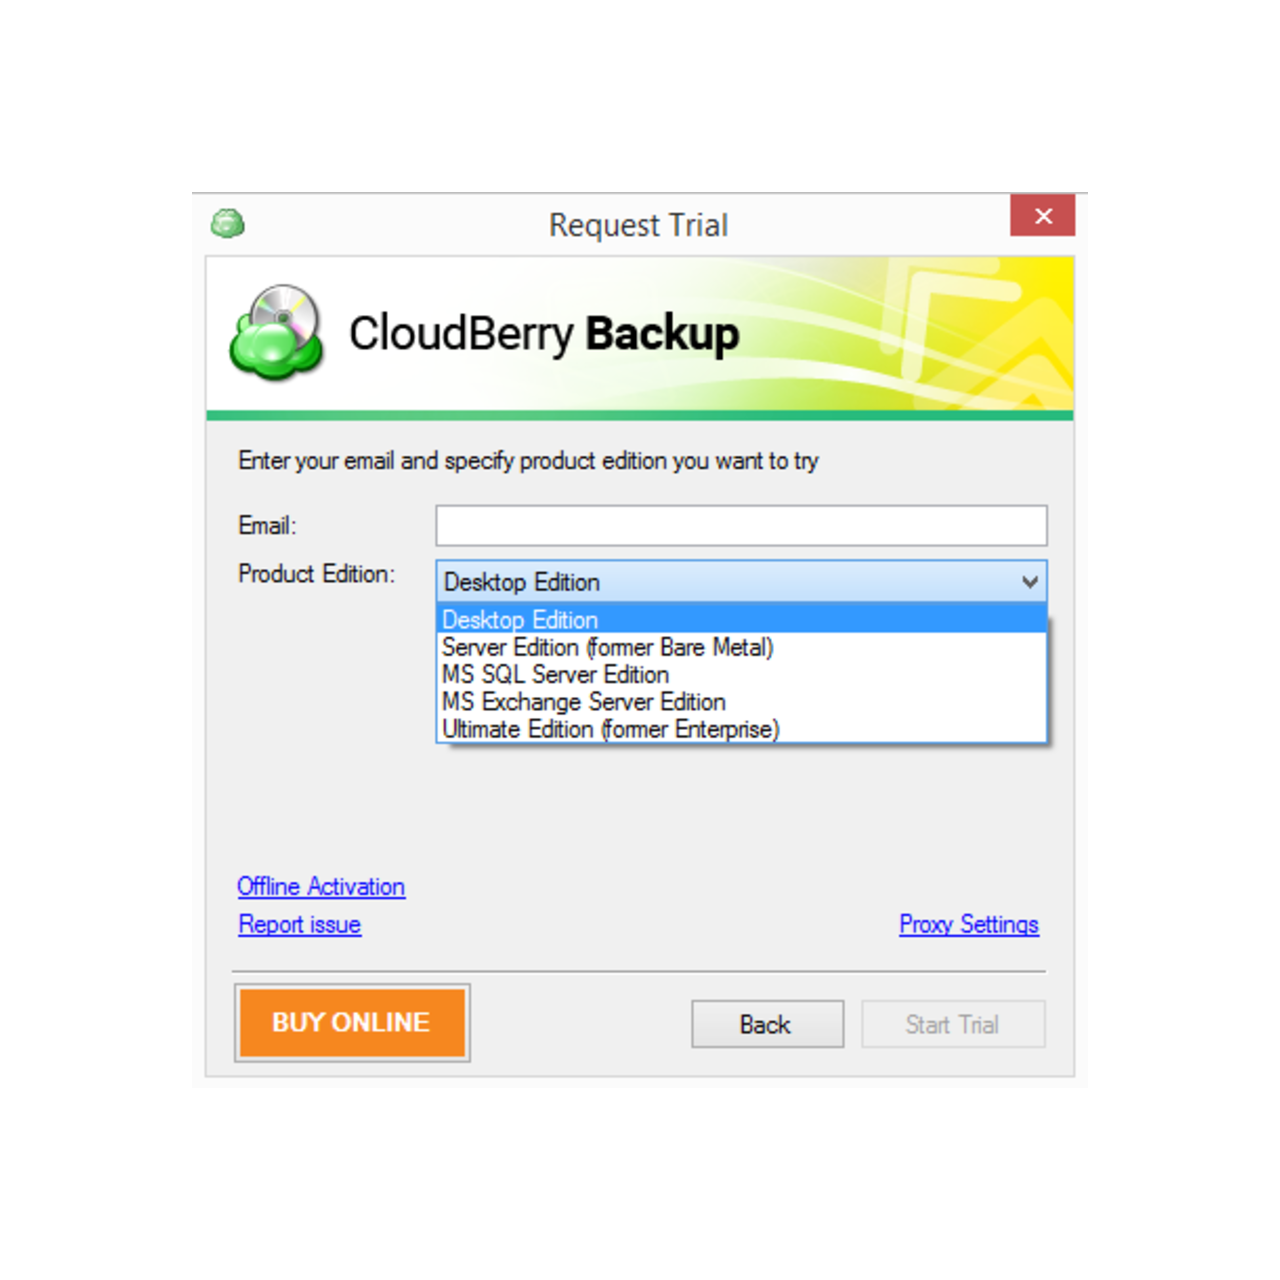 10 meg increments for cloudberry backup